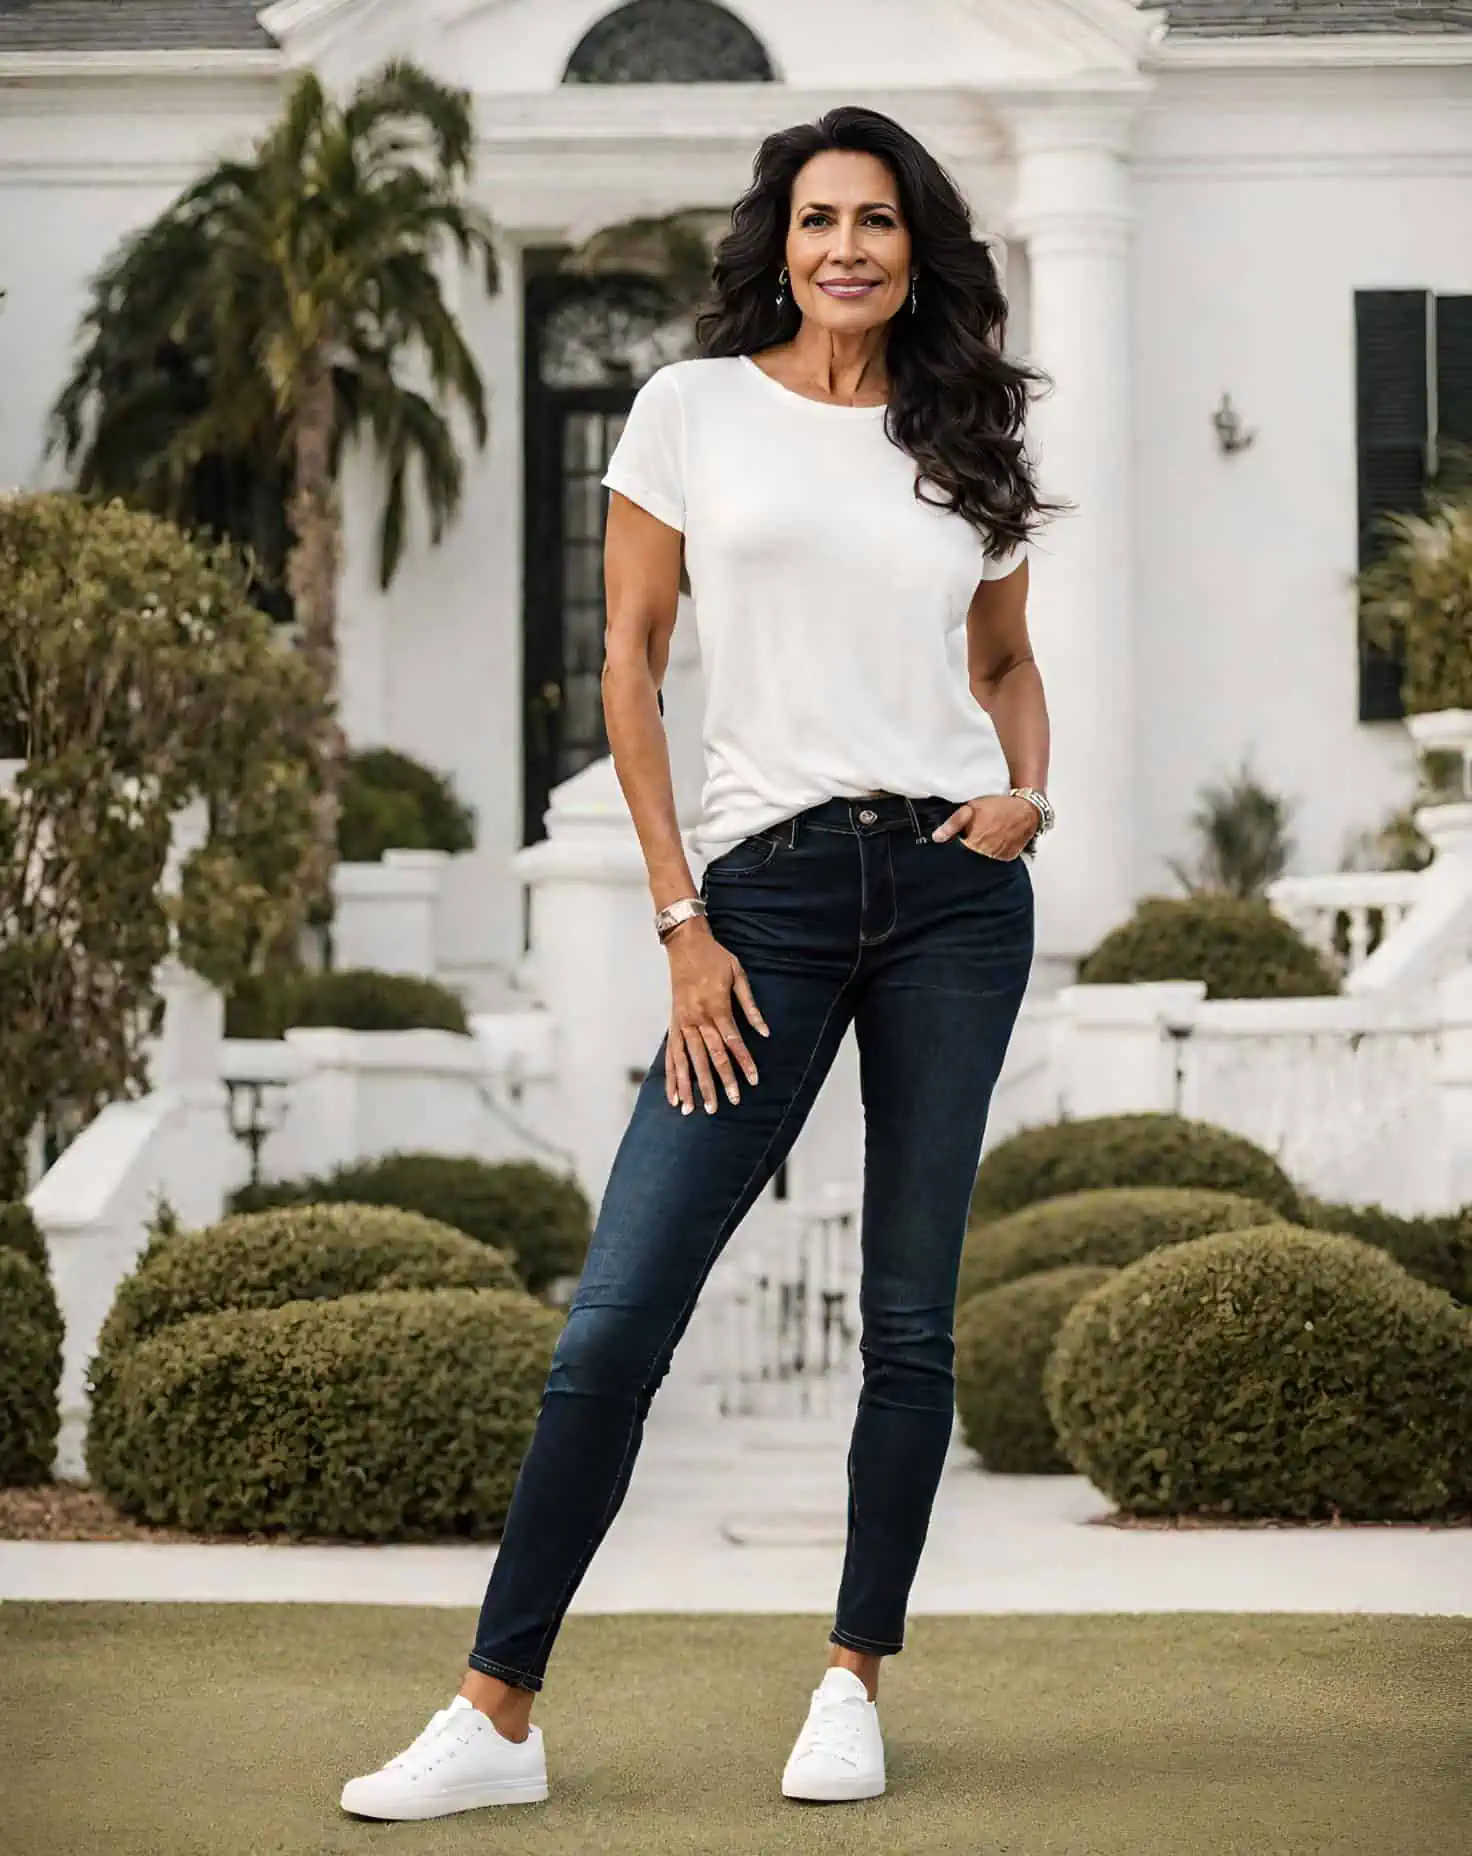 The Complete Jeans Guide for Women over 50 - Petite Dressing